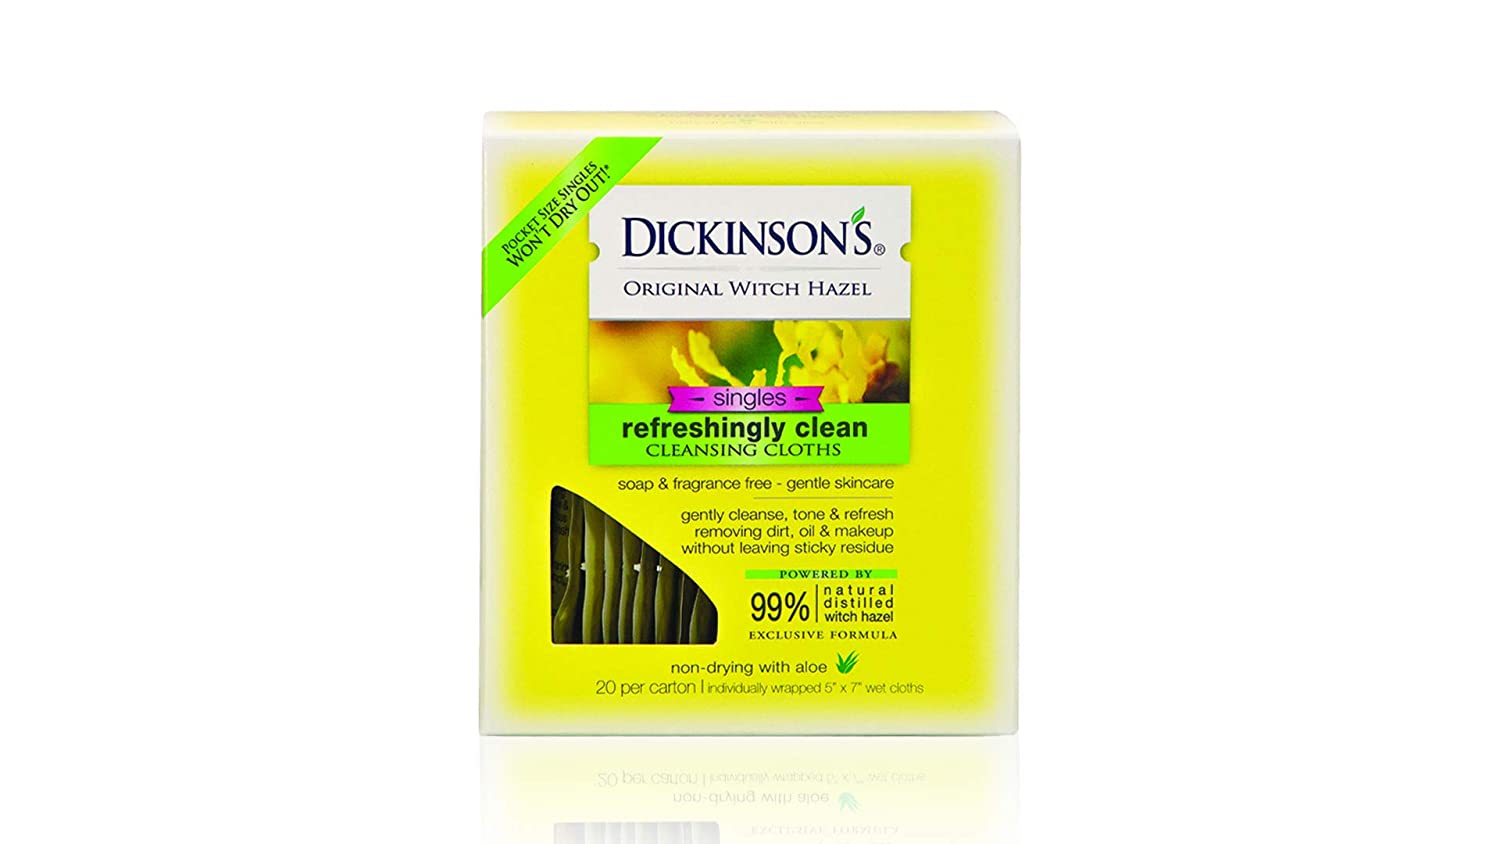 Dickinson's Original Witch Hazel Refreshingly Clean Towelettes 20 Each